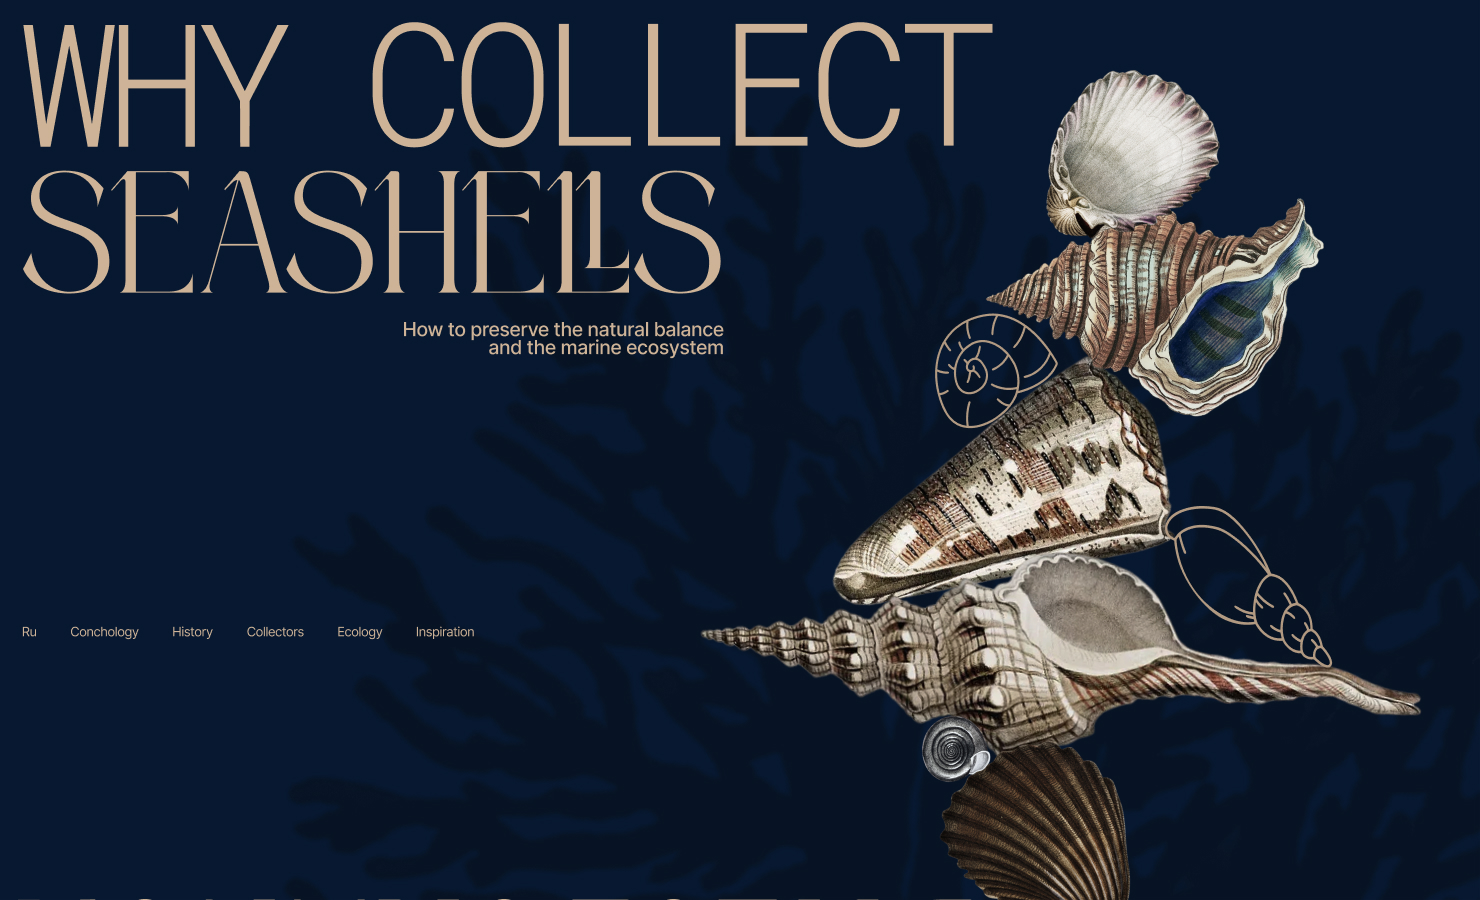 why collect seashells